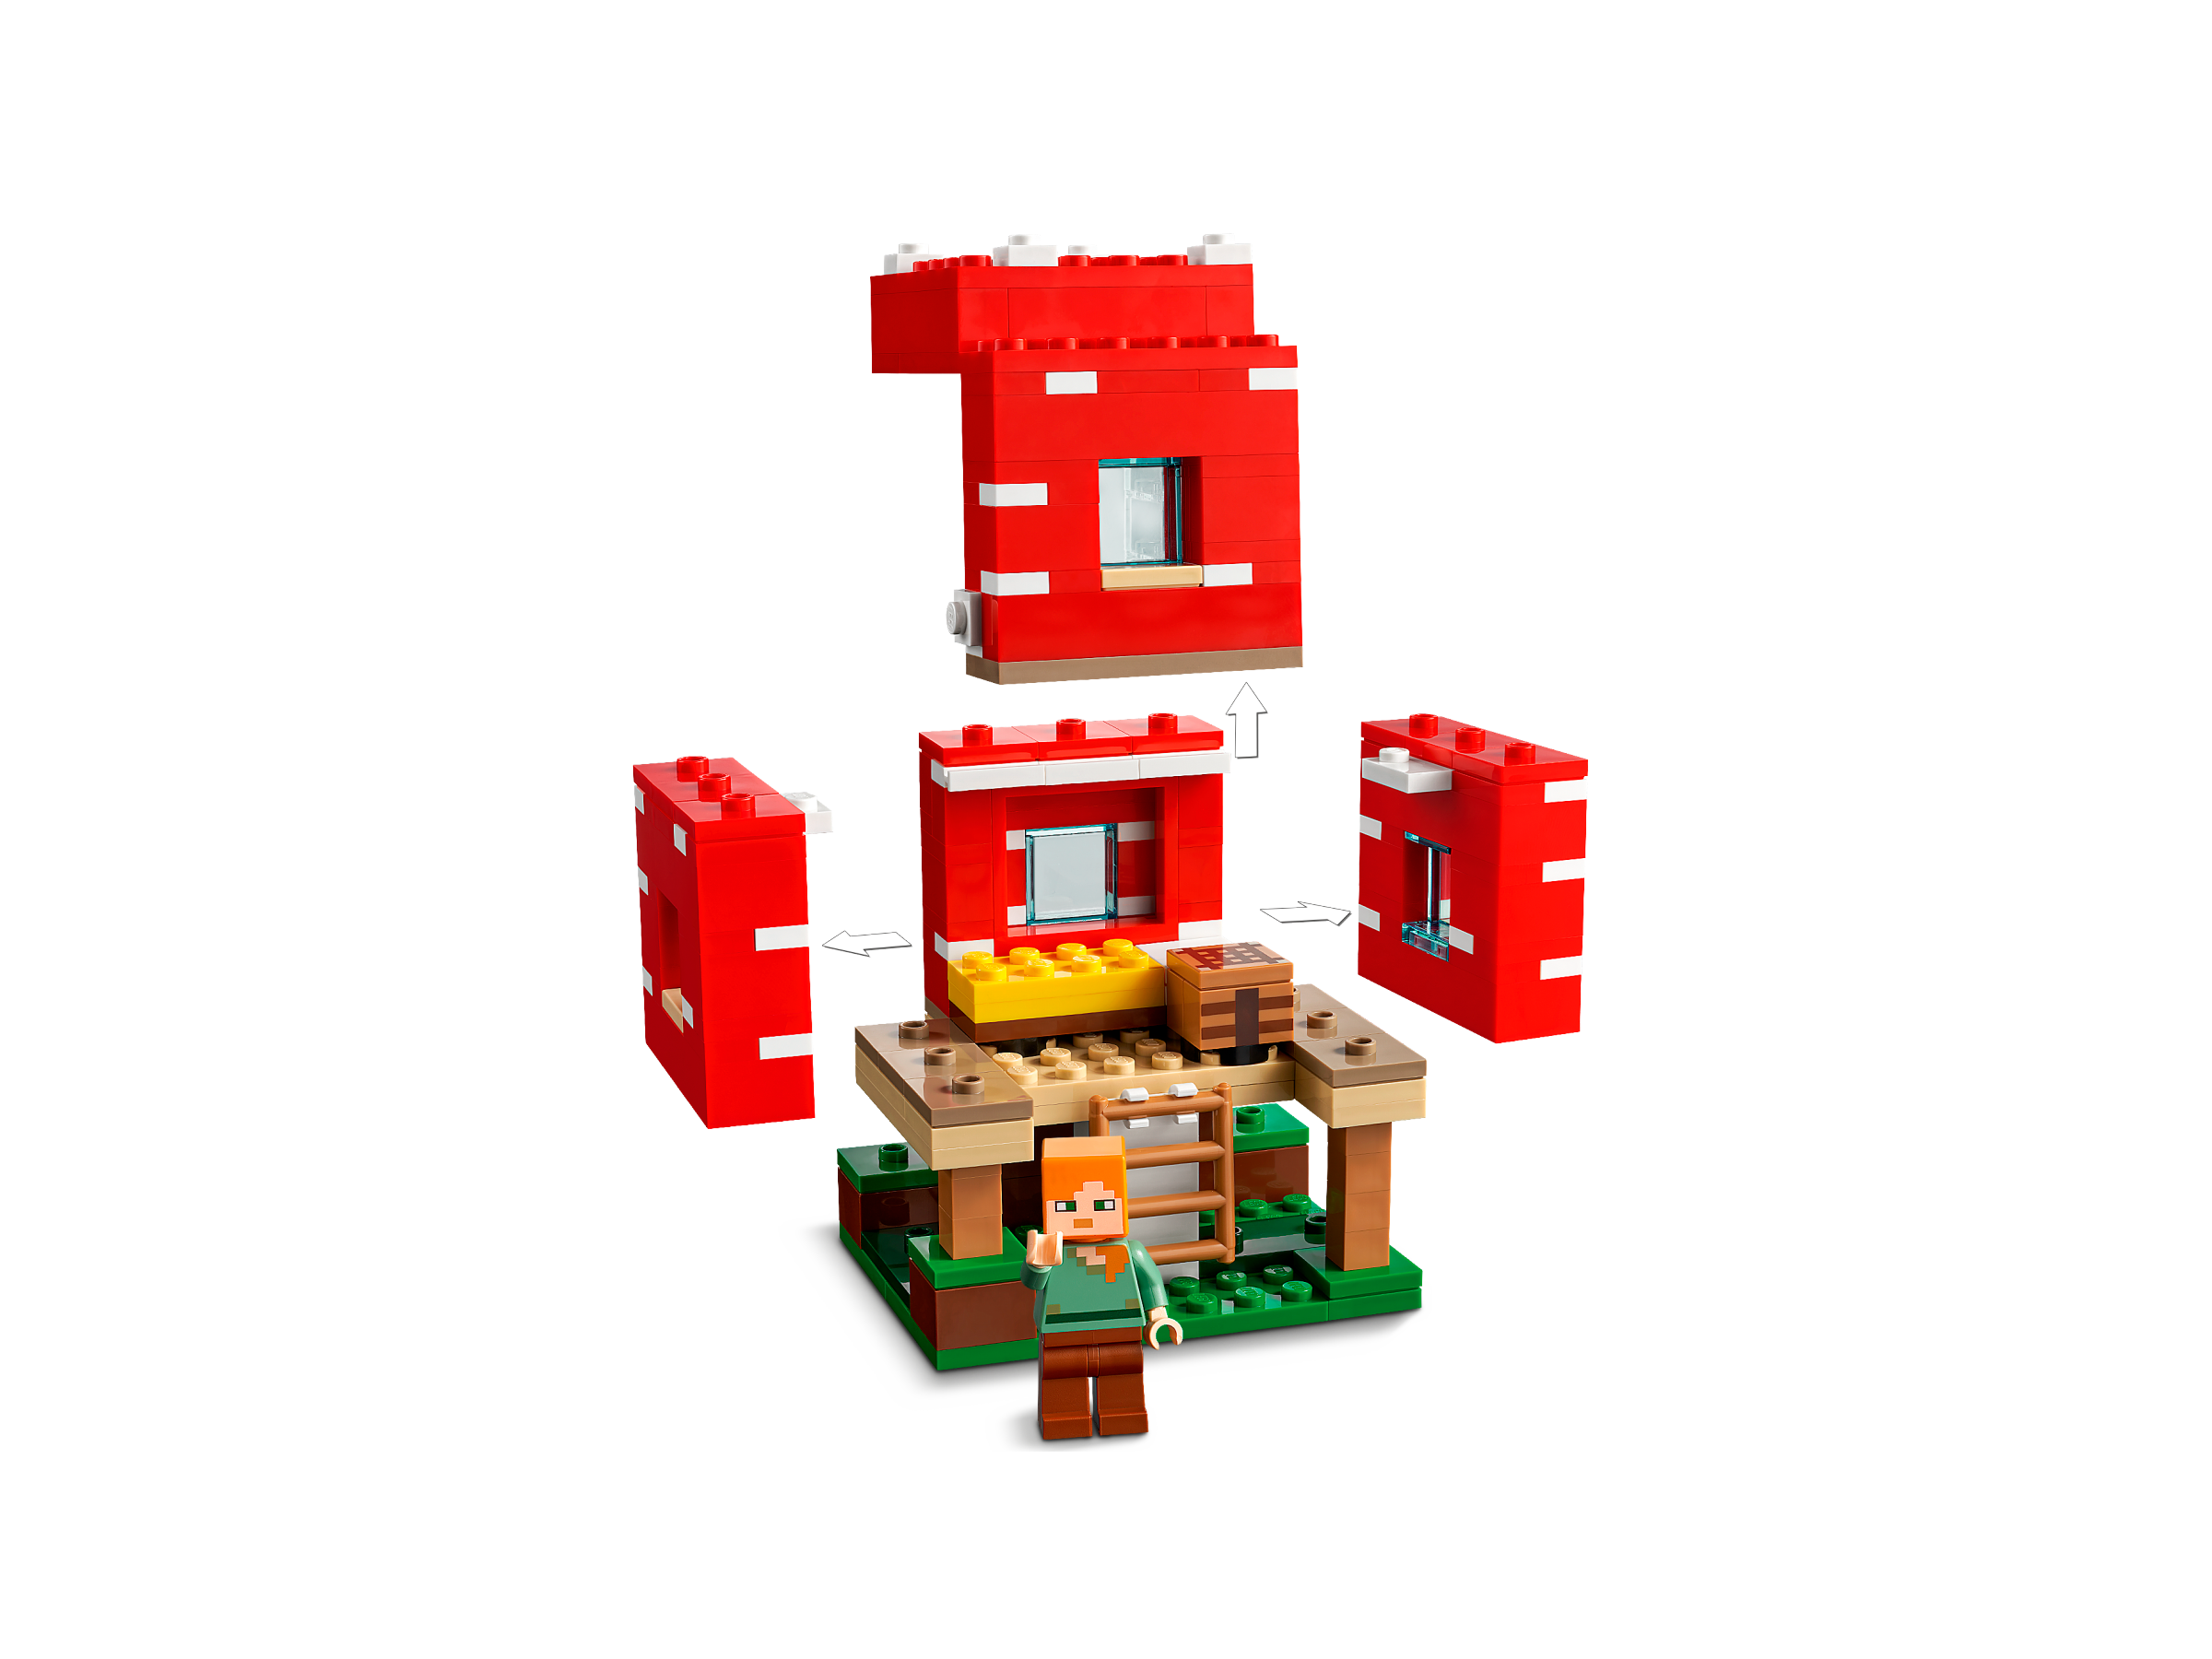 The Mushroom House 21179 | Minecraft® | Buy online at the Official LEGO®  Shop US